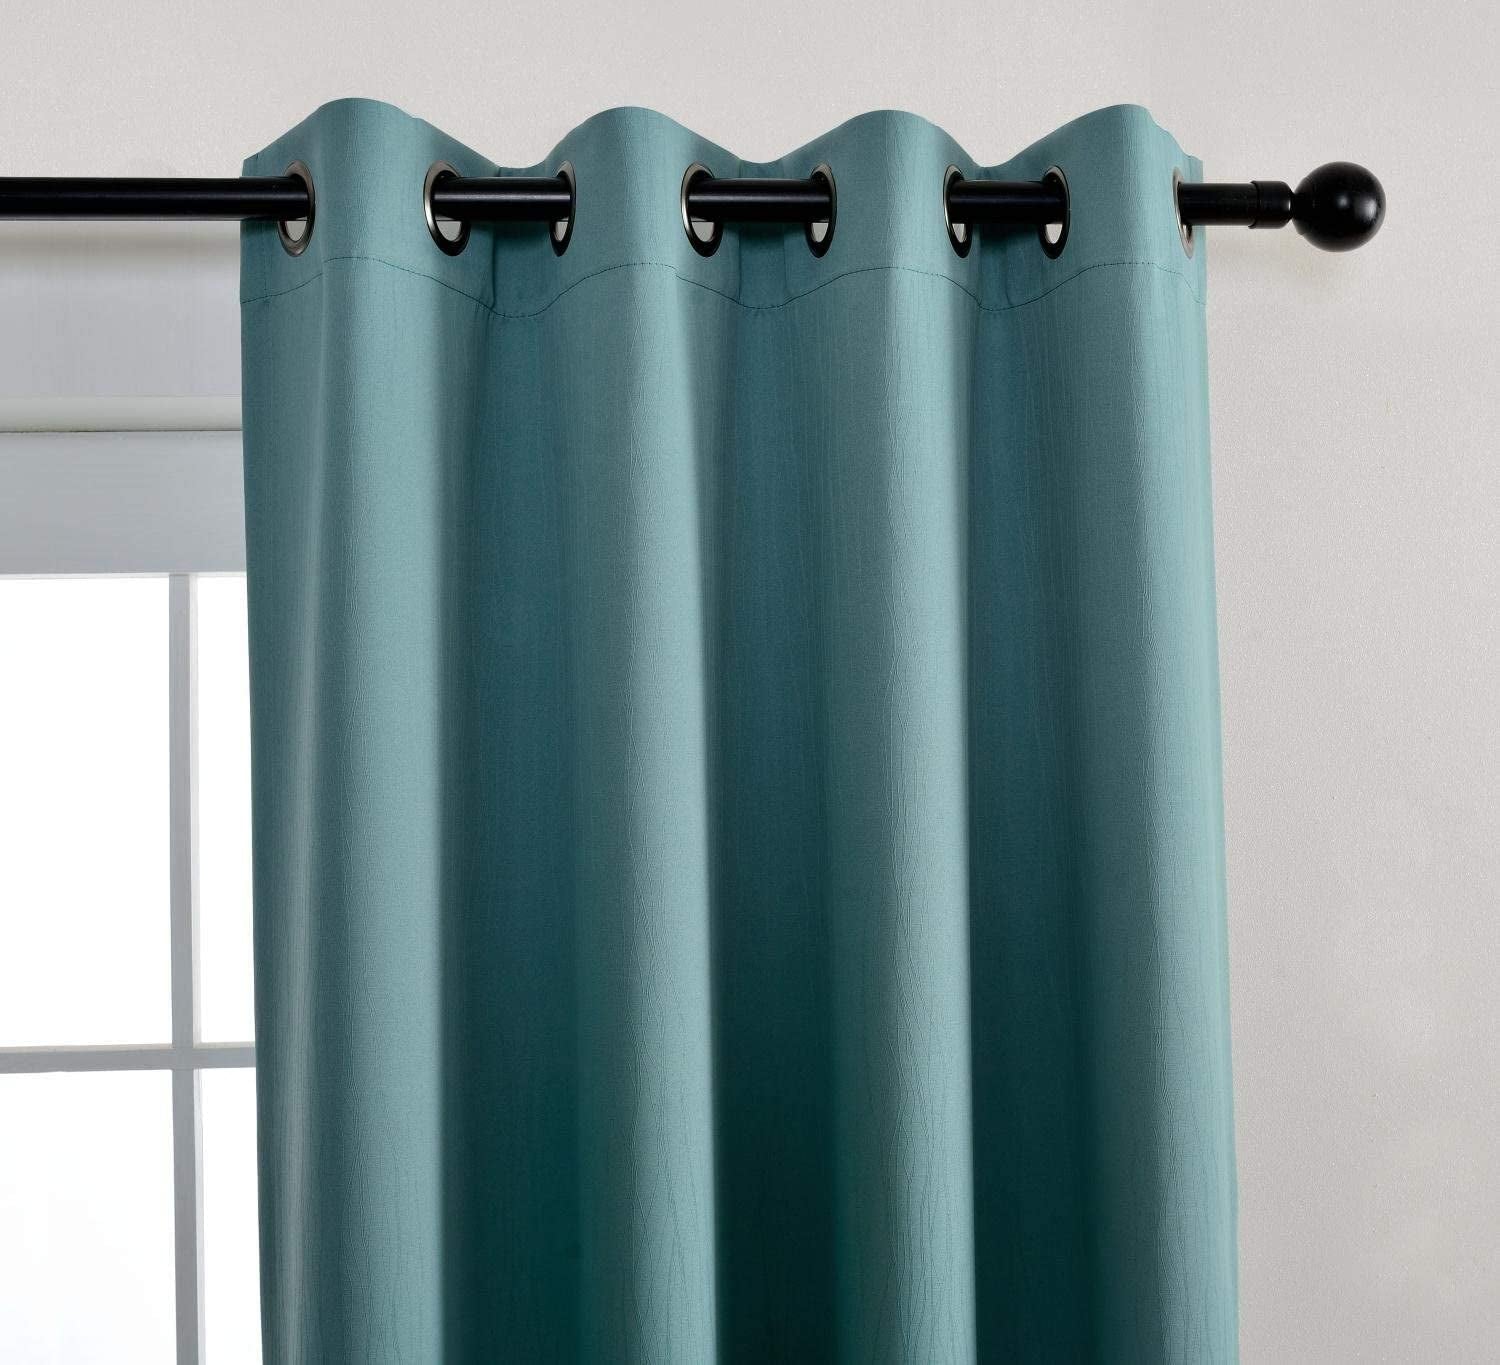 MIUCO Blackout Curtains Room Darkening Curtains Textured Grommet Curtains for Window Treatment 2 Panels 52X63 Inch Long Teal  MIUCO   